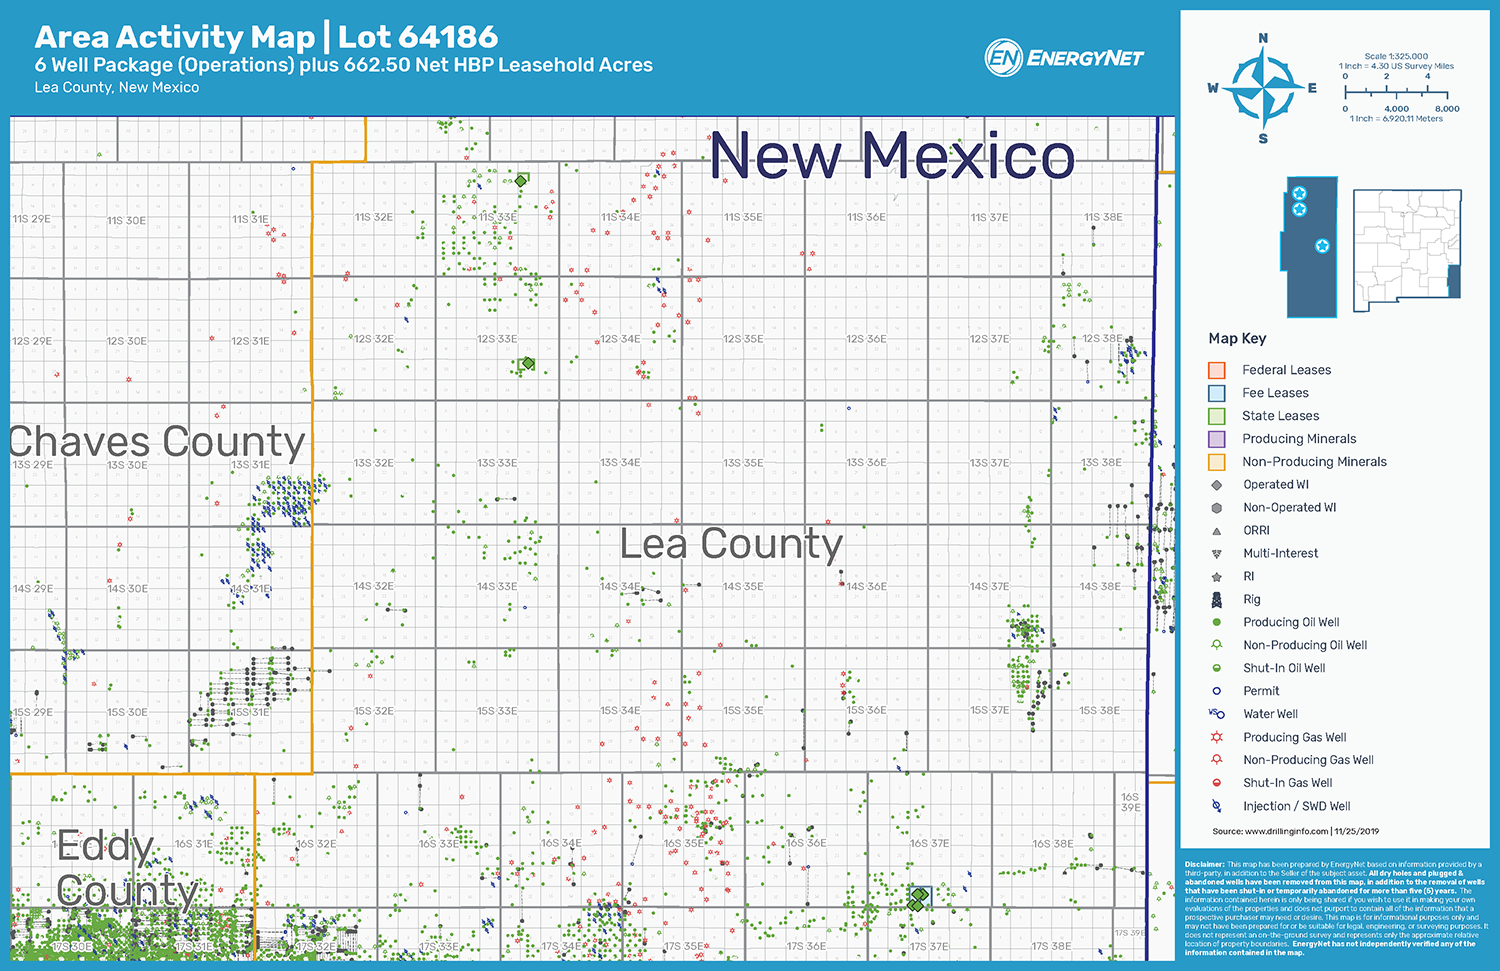 BASA Resources Operated Assets, HBP Leasehold Asset Map, Lea County, New Mexico (Source: EnergyNet)